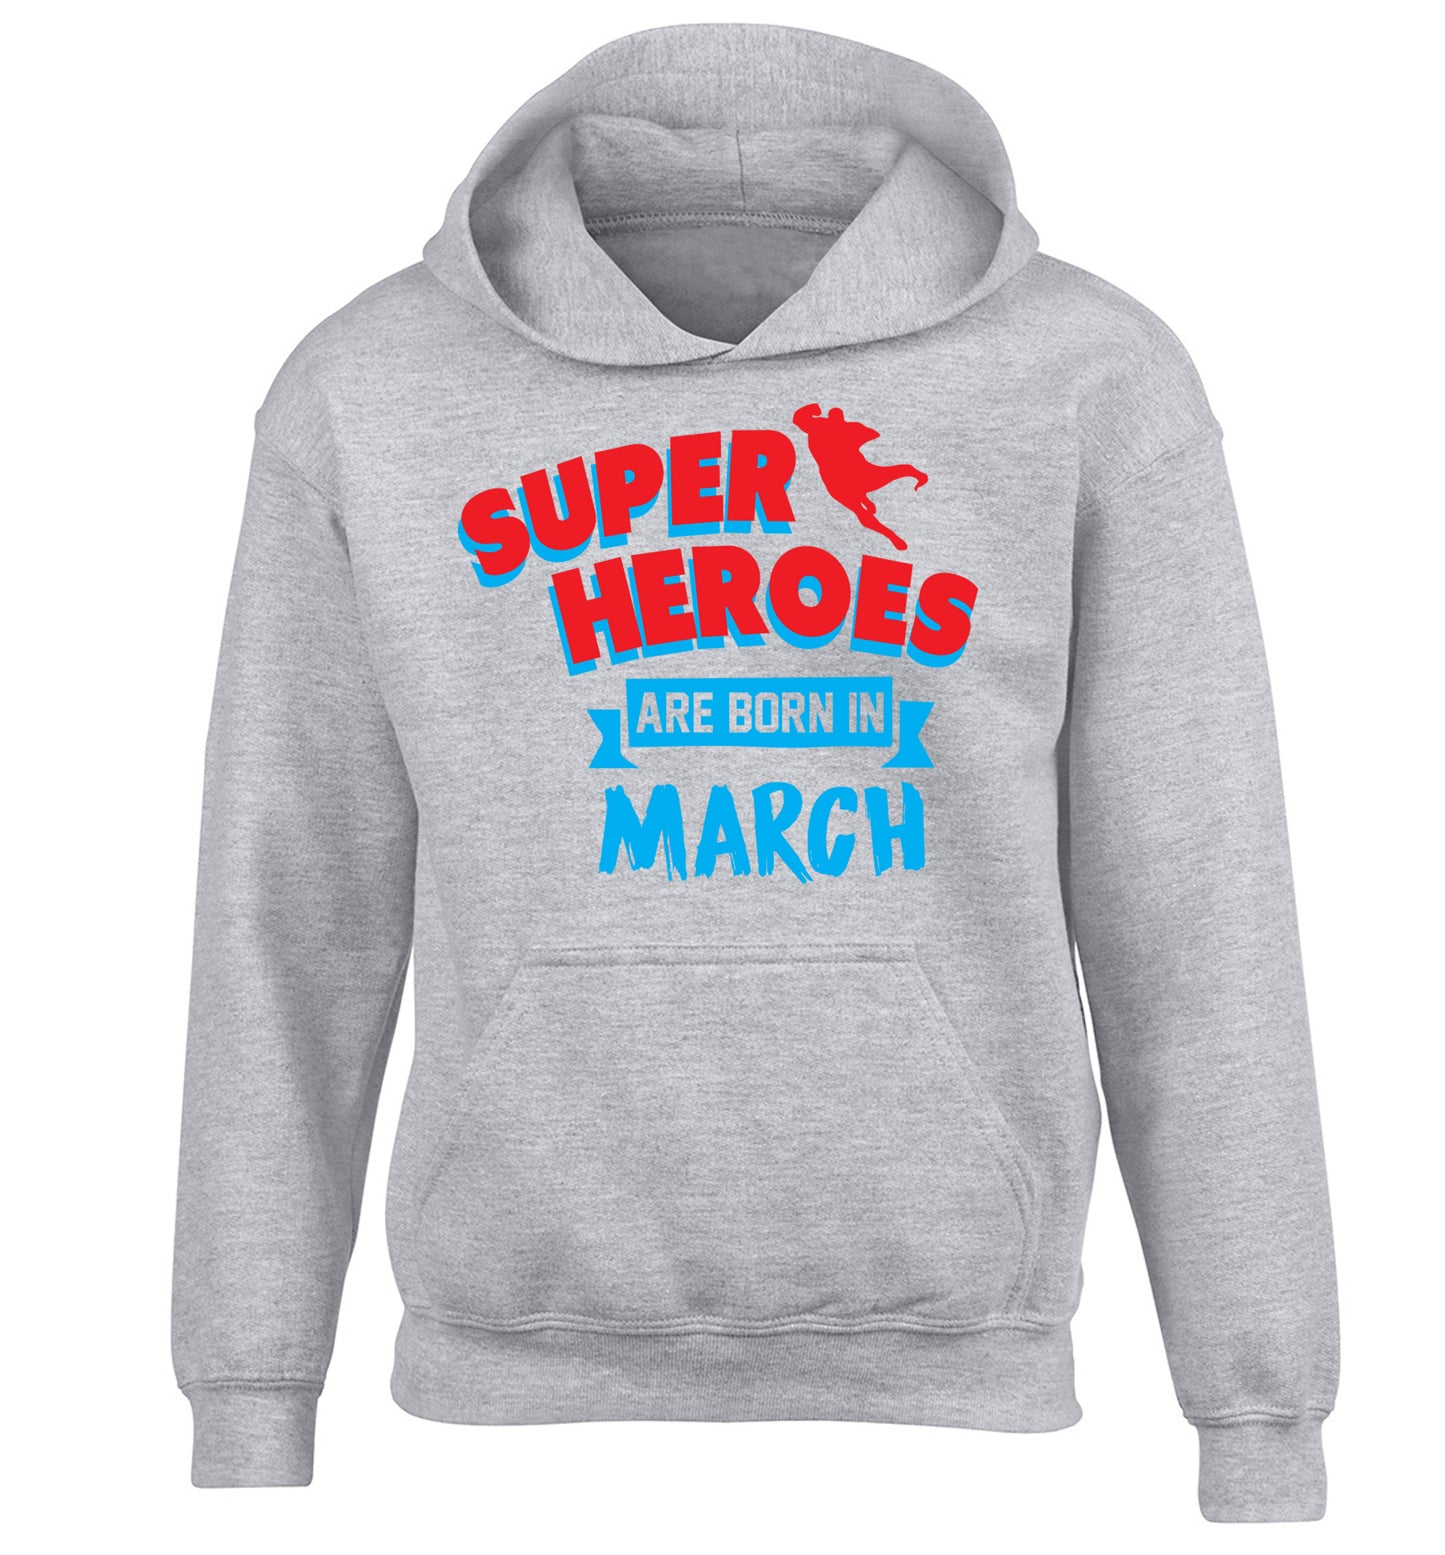 Superheros are born in March children's grey hoodie 12-13 Years